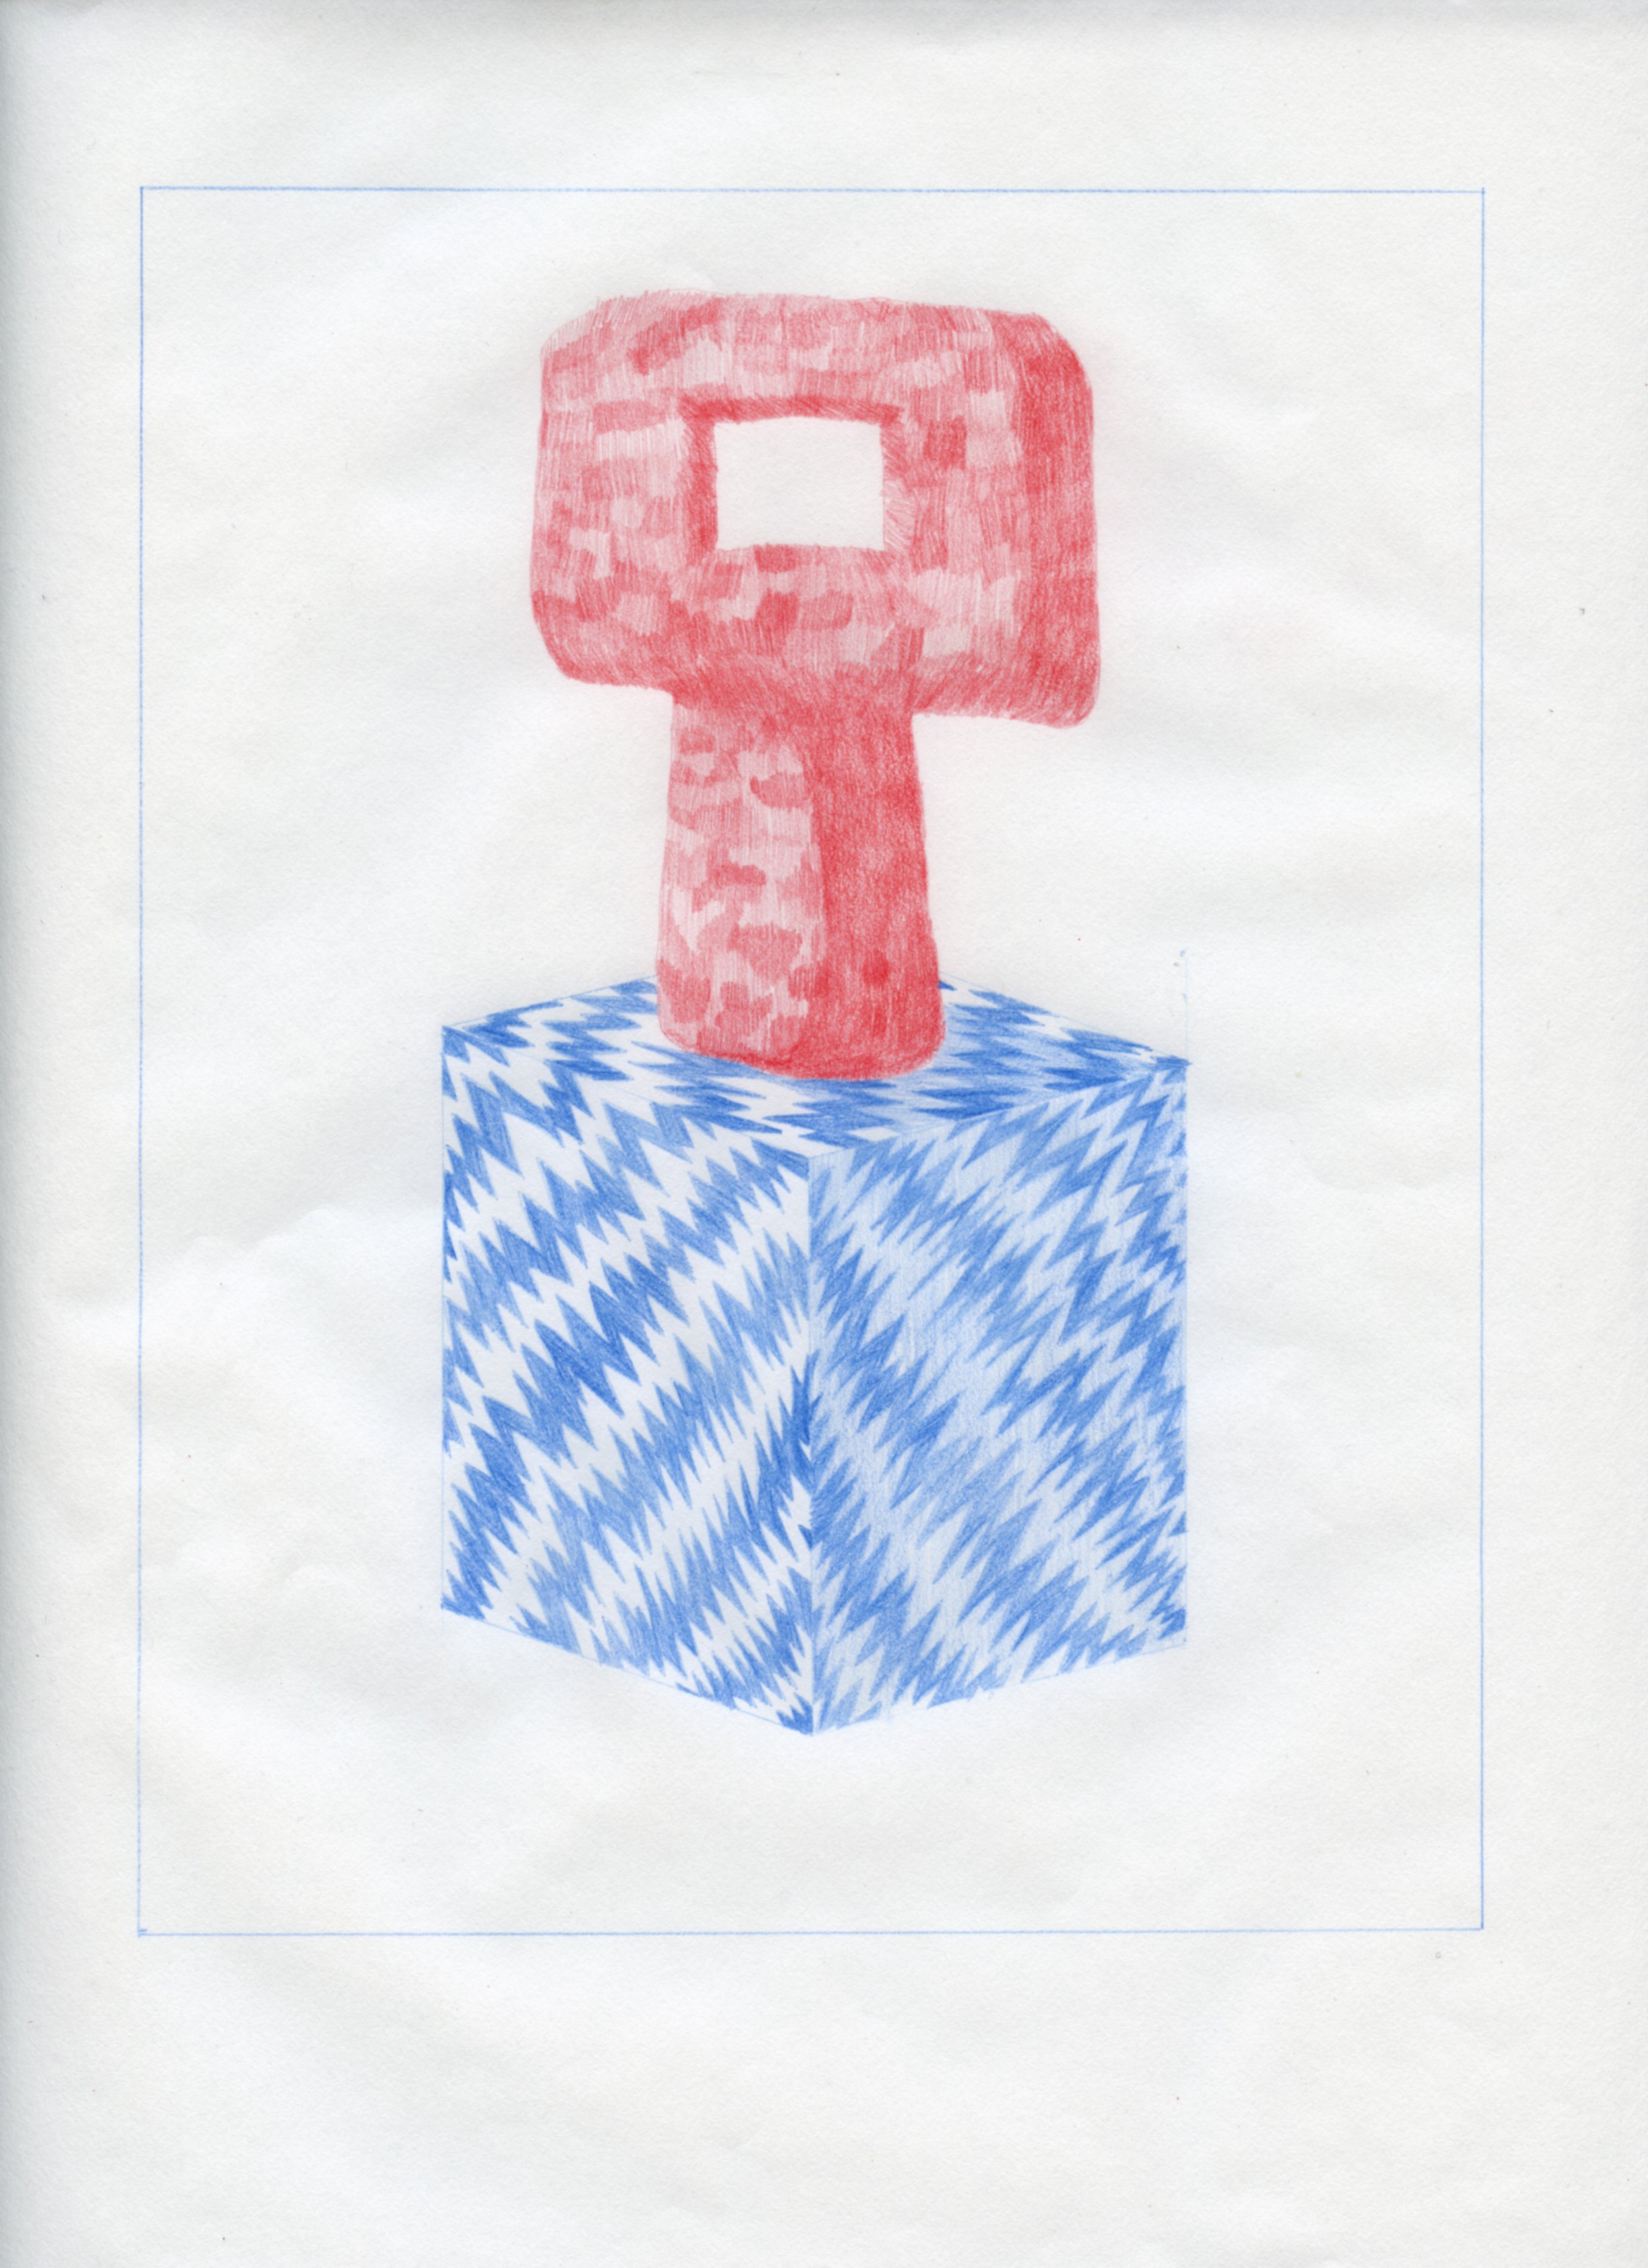  Workplace Drawing #30, 2021, Red and Blue Graphite on Bond Paper, 9”x 12”. 